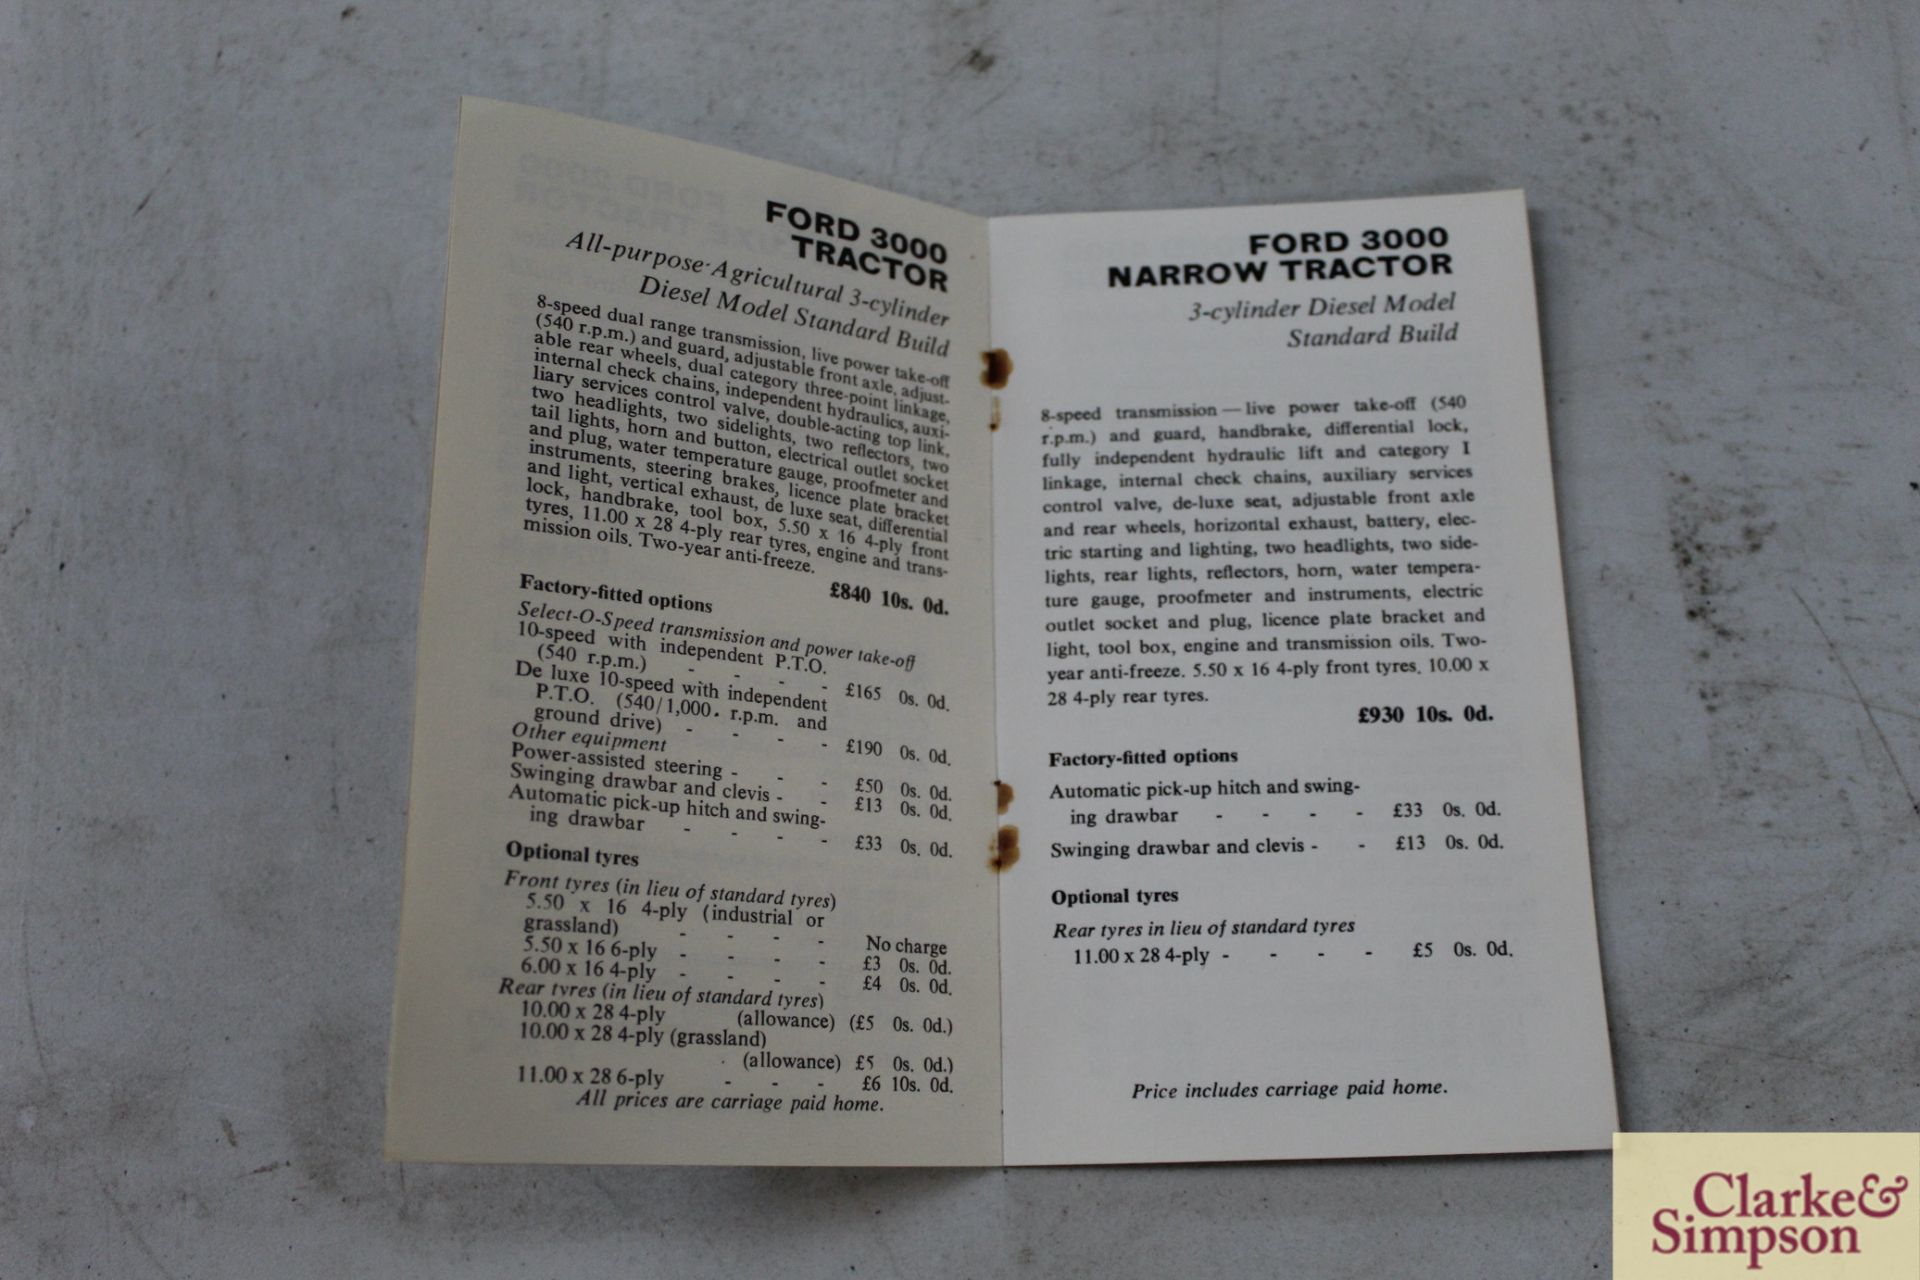 Ford Tractor Price List, 29th April 1966 and Addre - Image 9 of 12